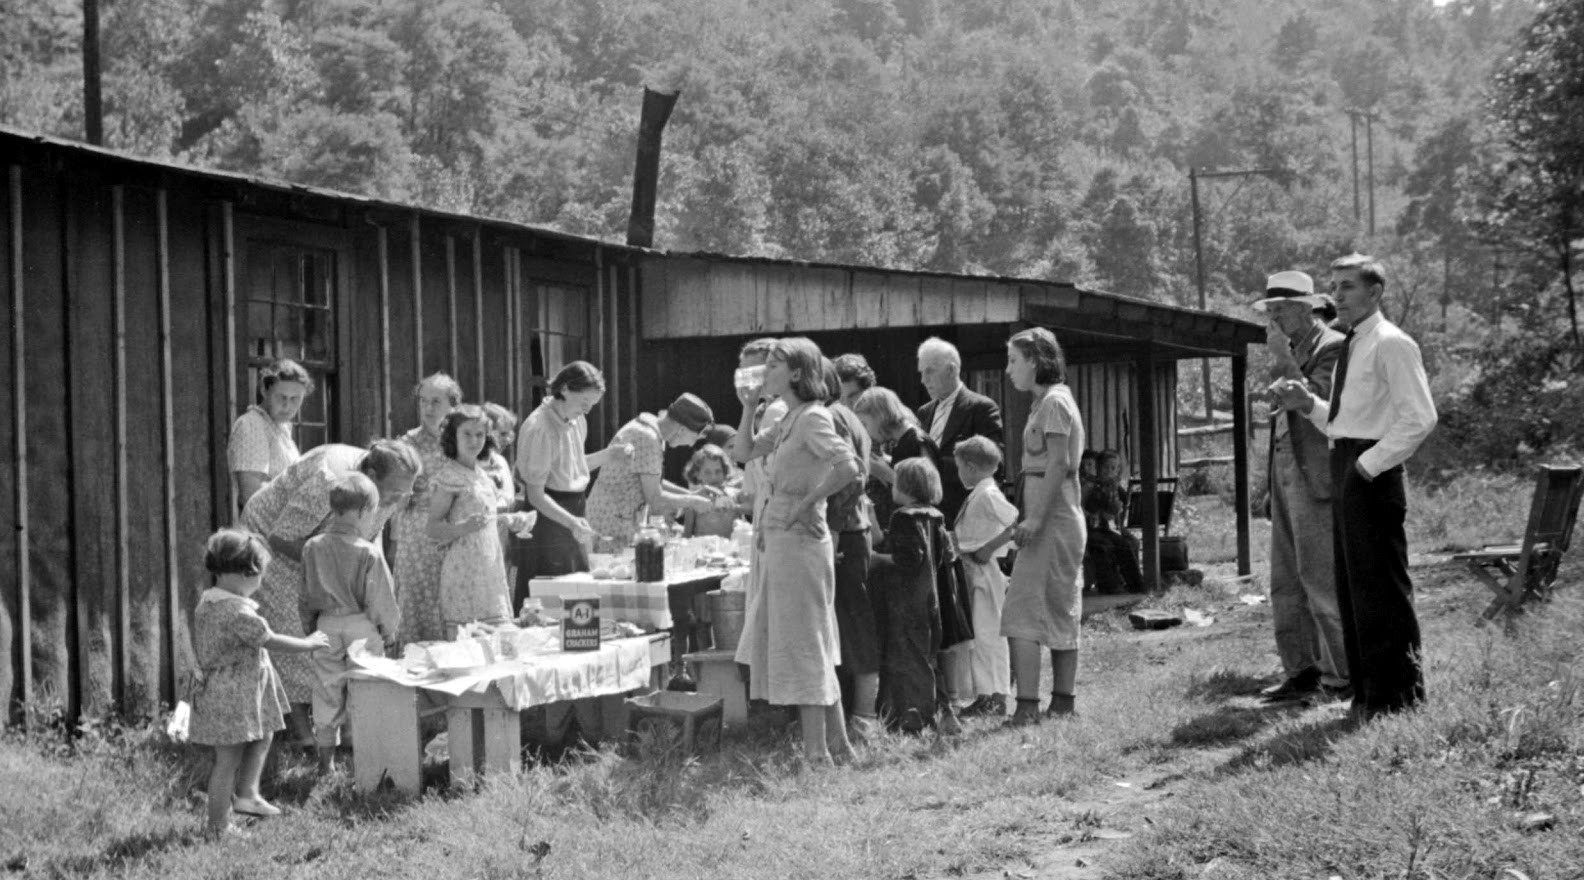 picnic-brought-into-abandoned-mining-town-of-jere-west-virginia-1600x1034-e1417315754424.jpg